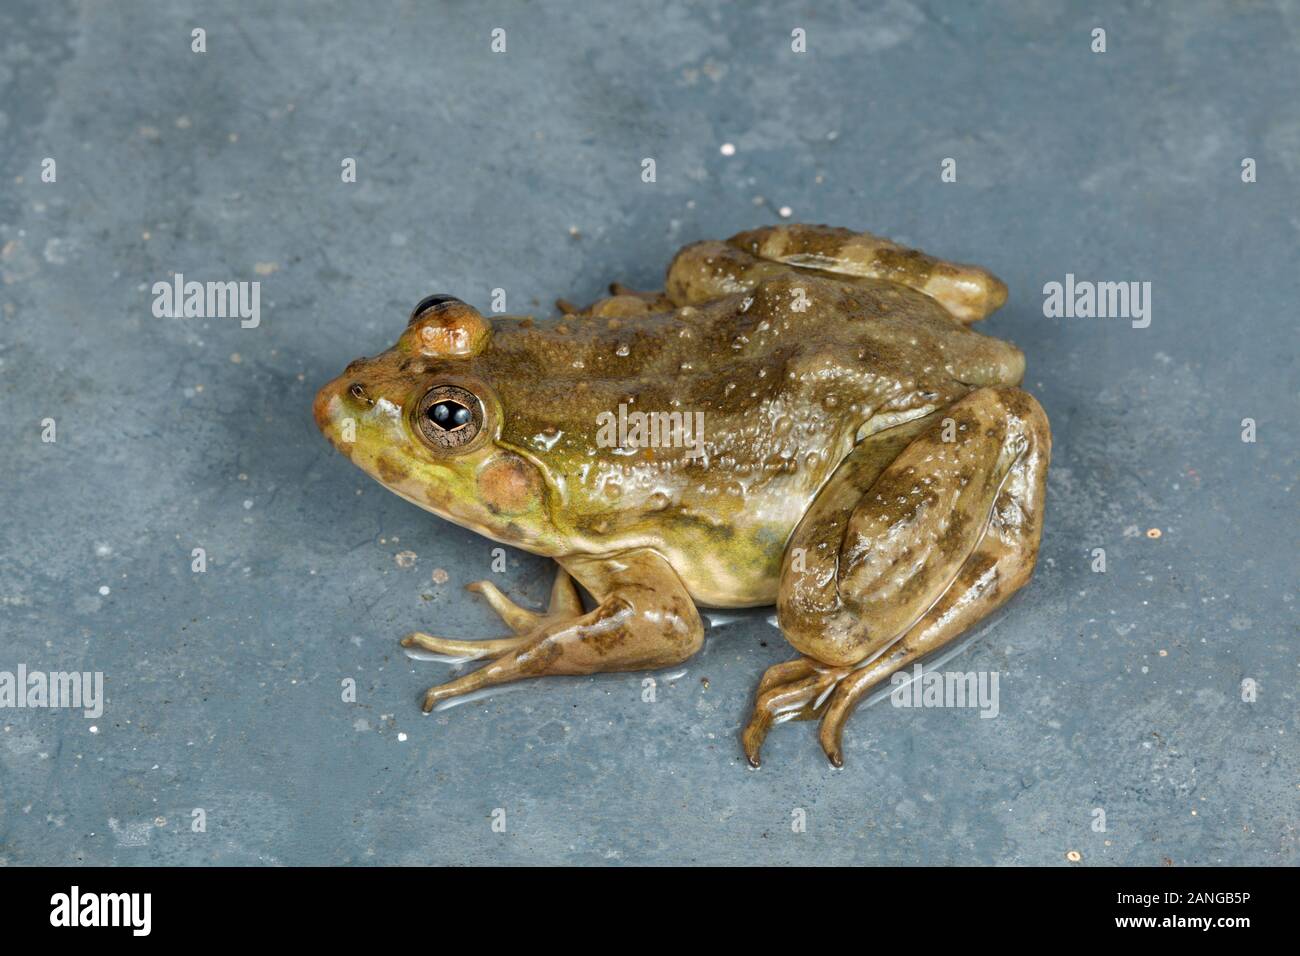 Euphlyctis cyanophlyctis, Indian skipper frog or skittering frog is common dicroglossid frog found in South Asia Stock Photo